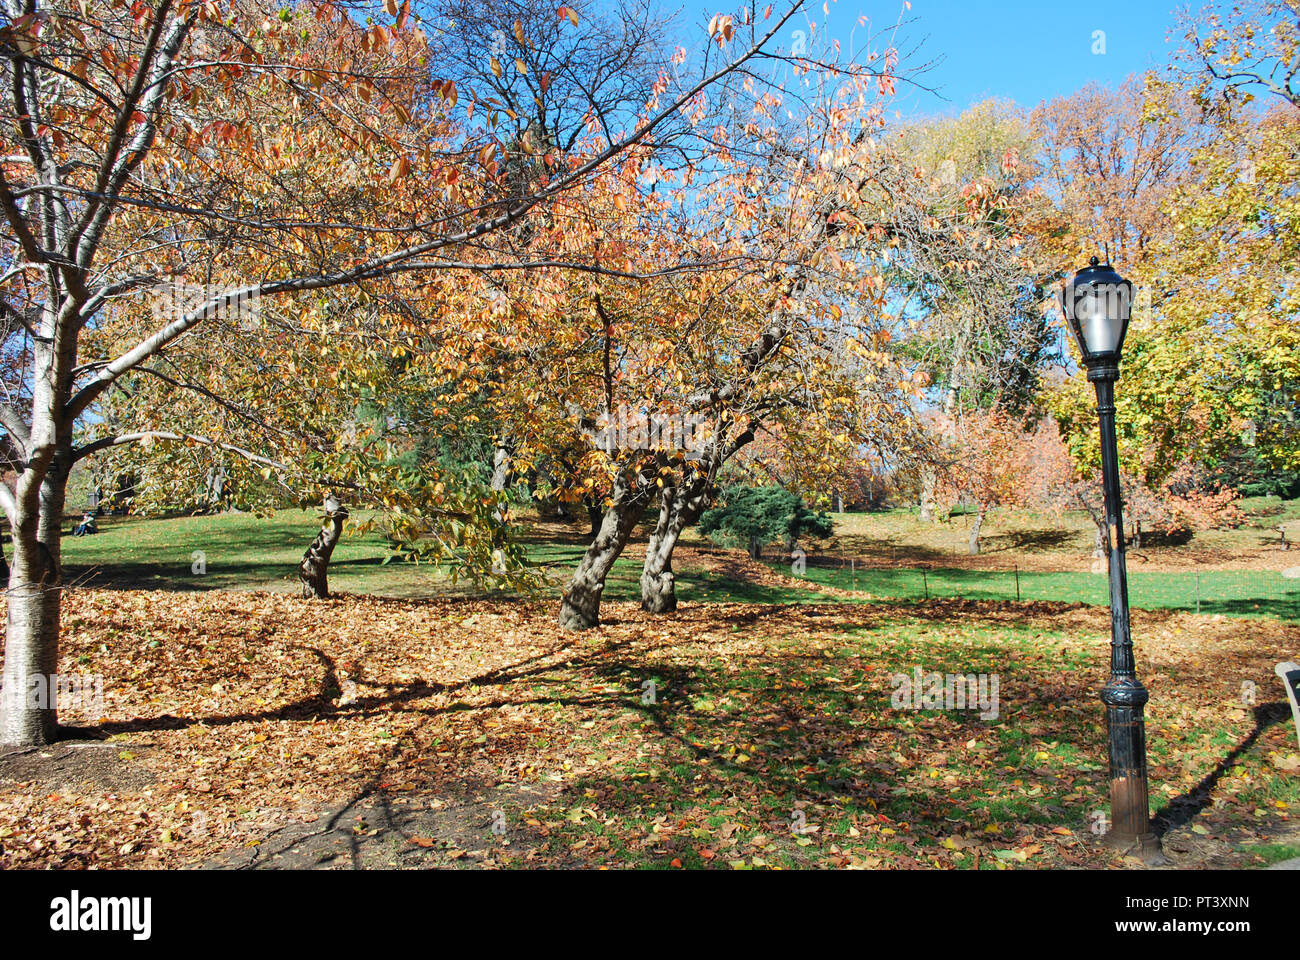 autumn leaves in central park new york Stock Photo